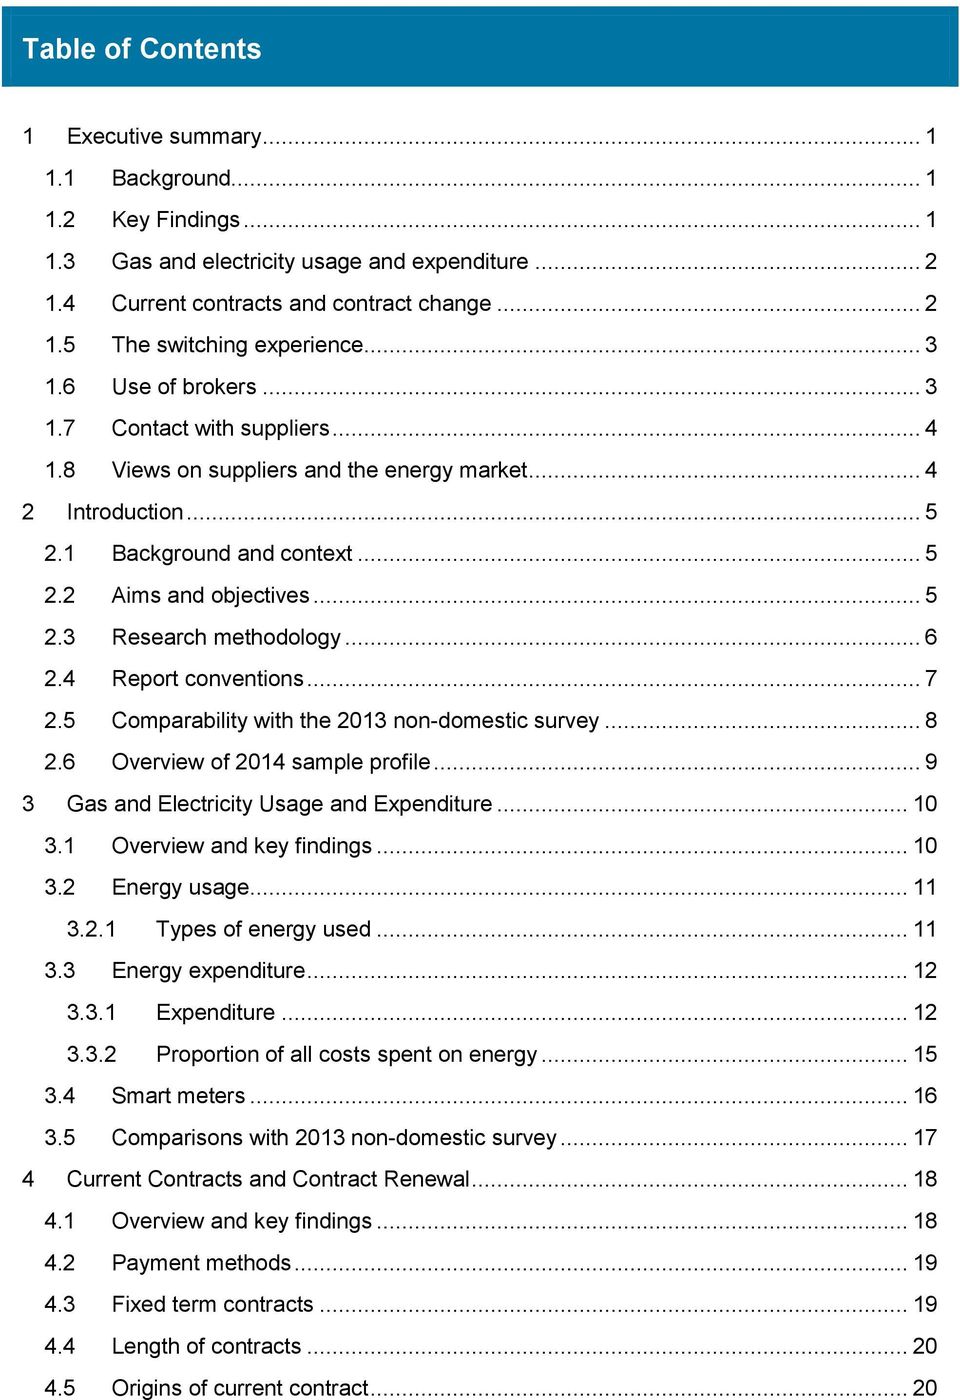 .. 6 2.4 Report conventions... 7 2.5 Comparability with the 2013 non-domestic survey... 8 2.6 Overview of 2014 sample profile... 9 3 Gas and Electricity Usage and Expenditure... 10 3.